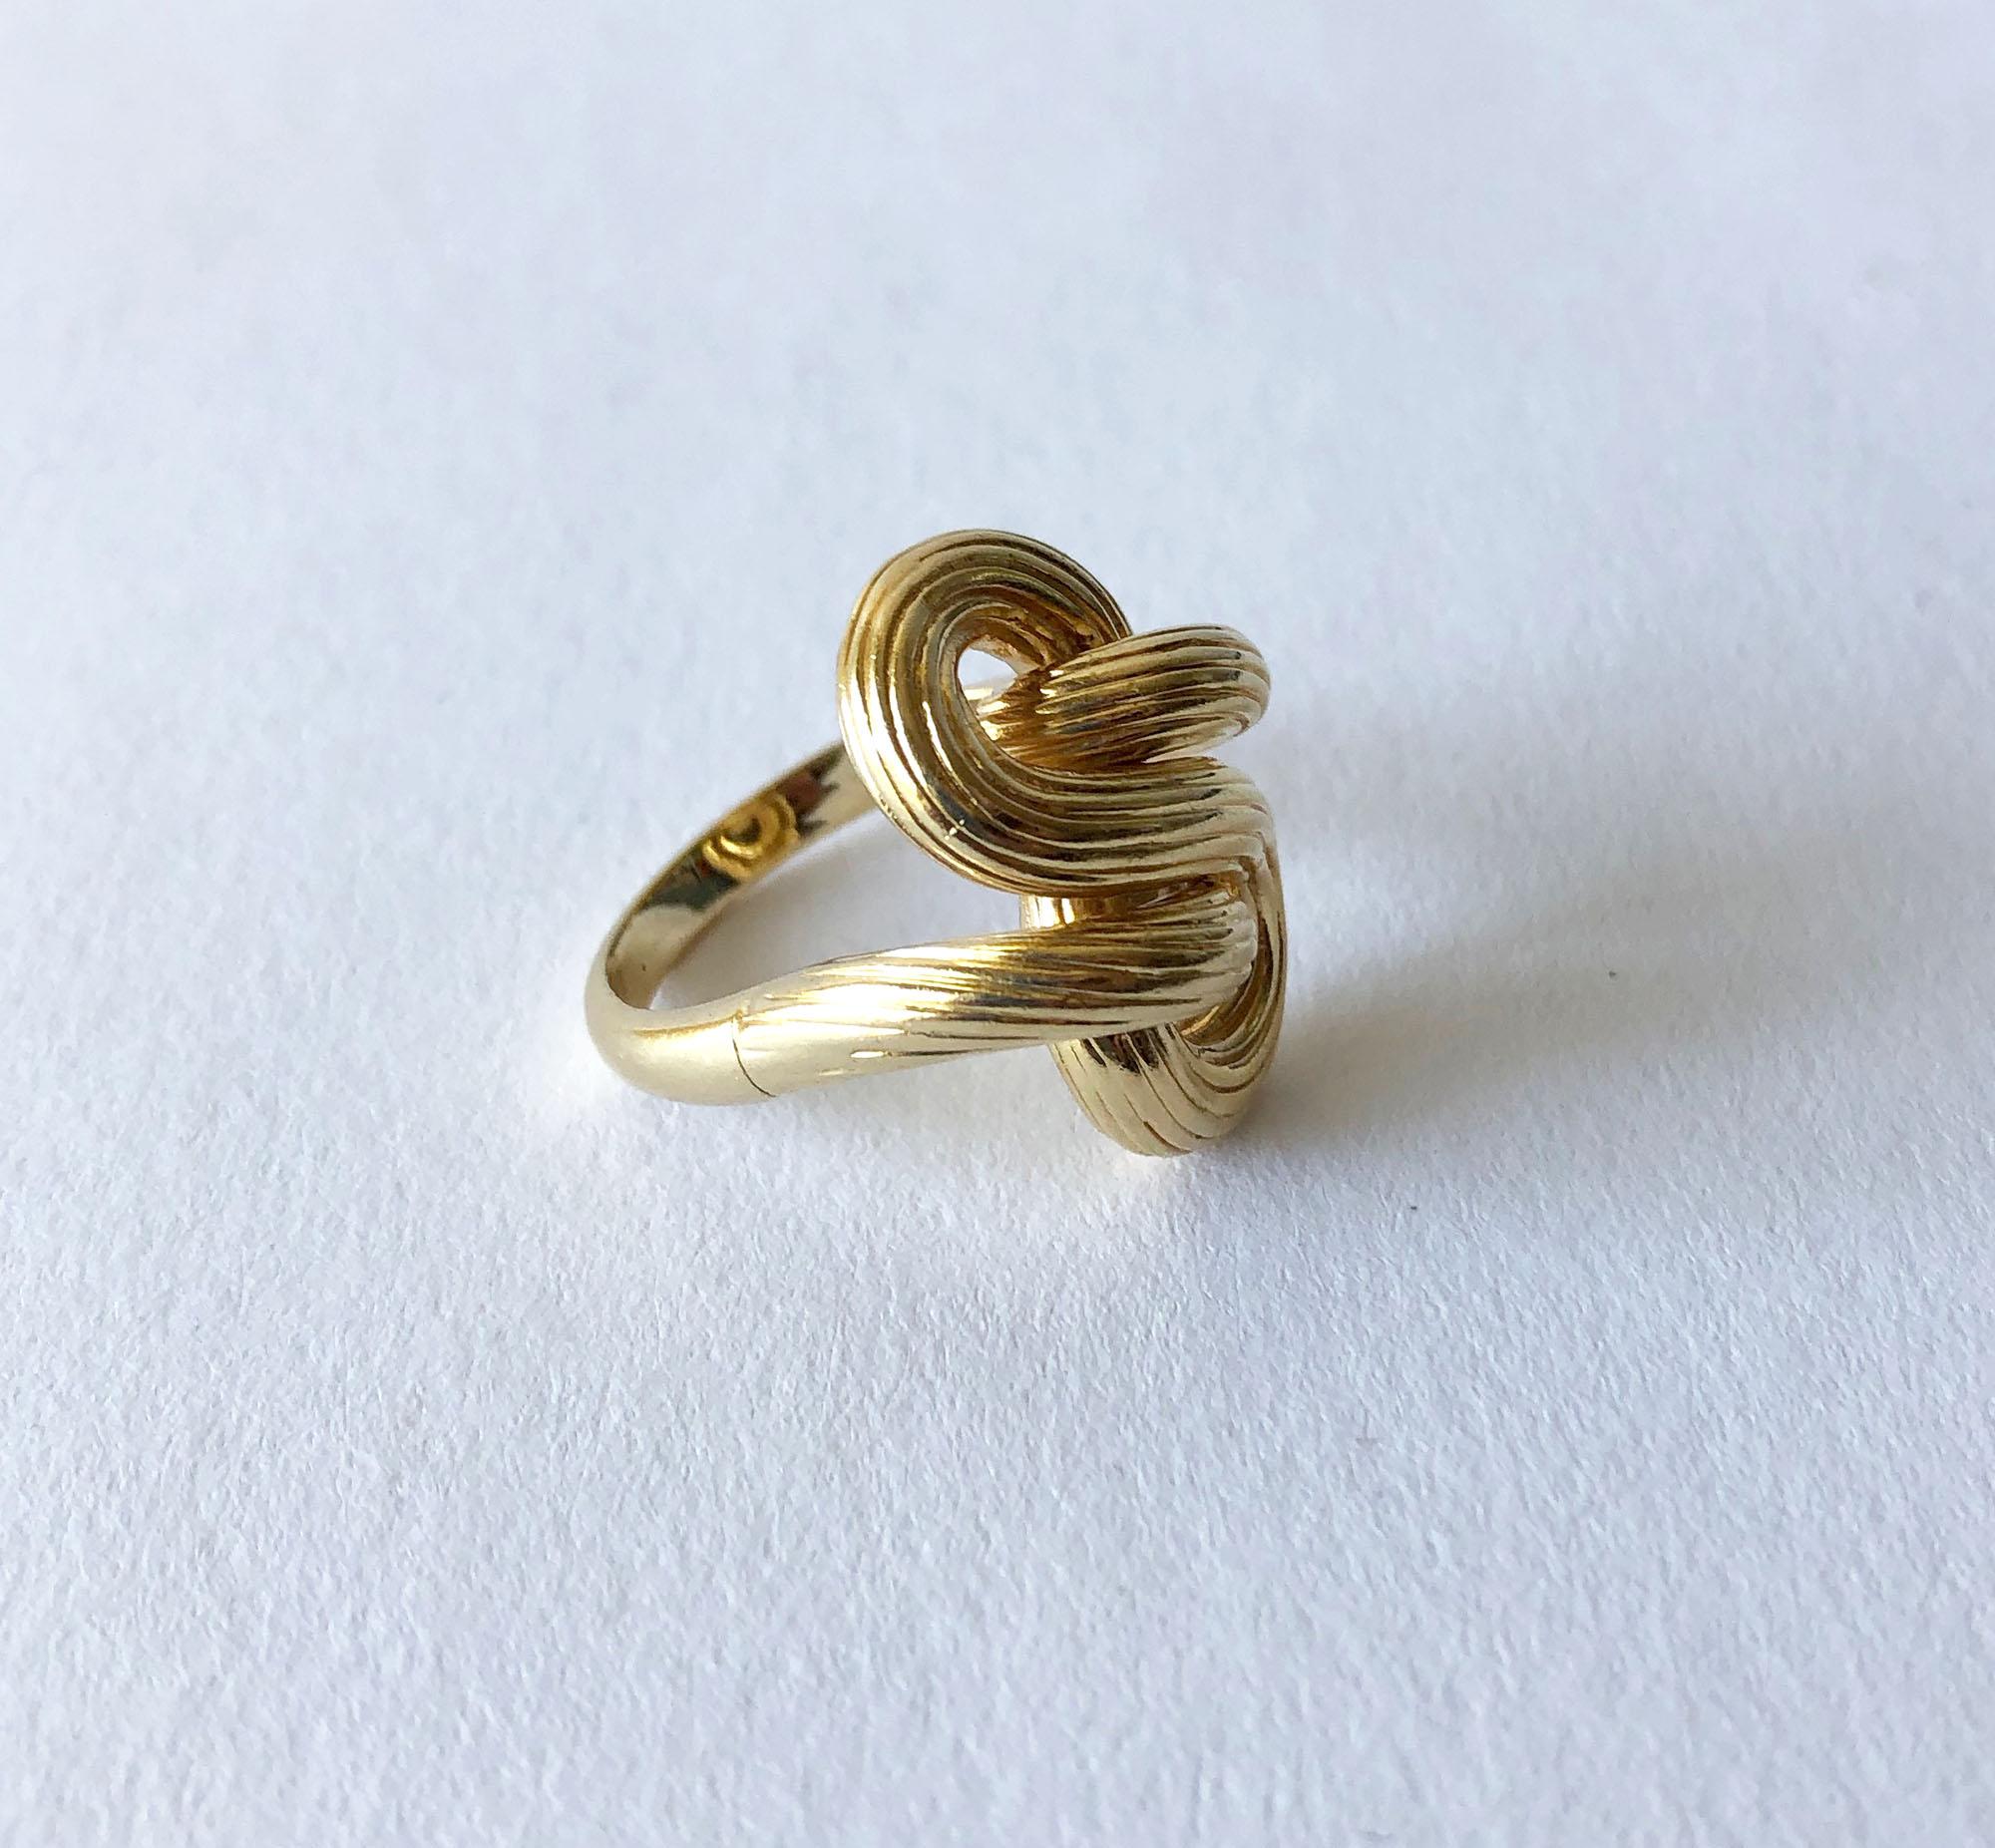 Florentined 14K gold knot ring, circa 1960's.  Ring is a finger size 8.5 - 9 and is signed 14K.  In very good vintage condition.  10.4 grams.